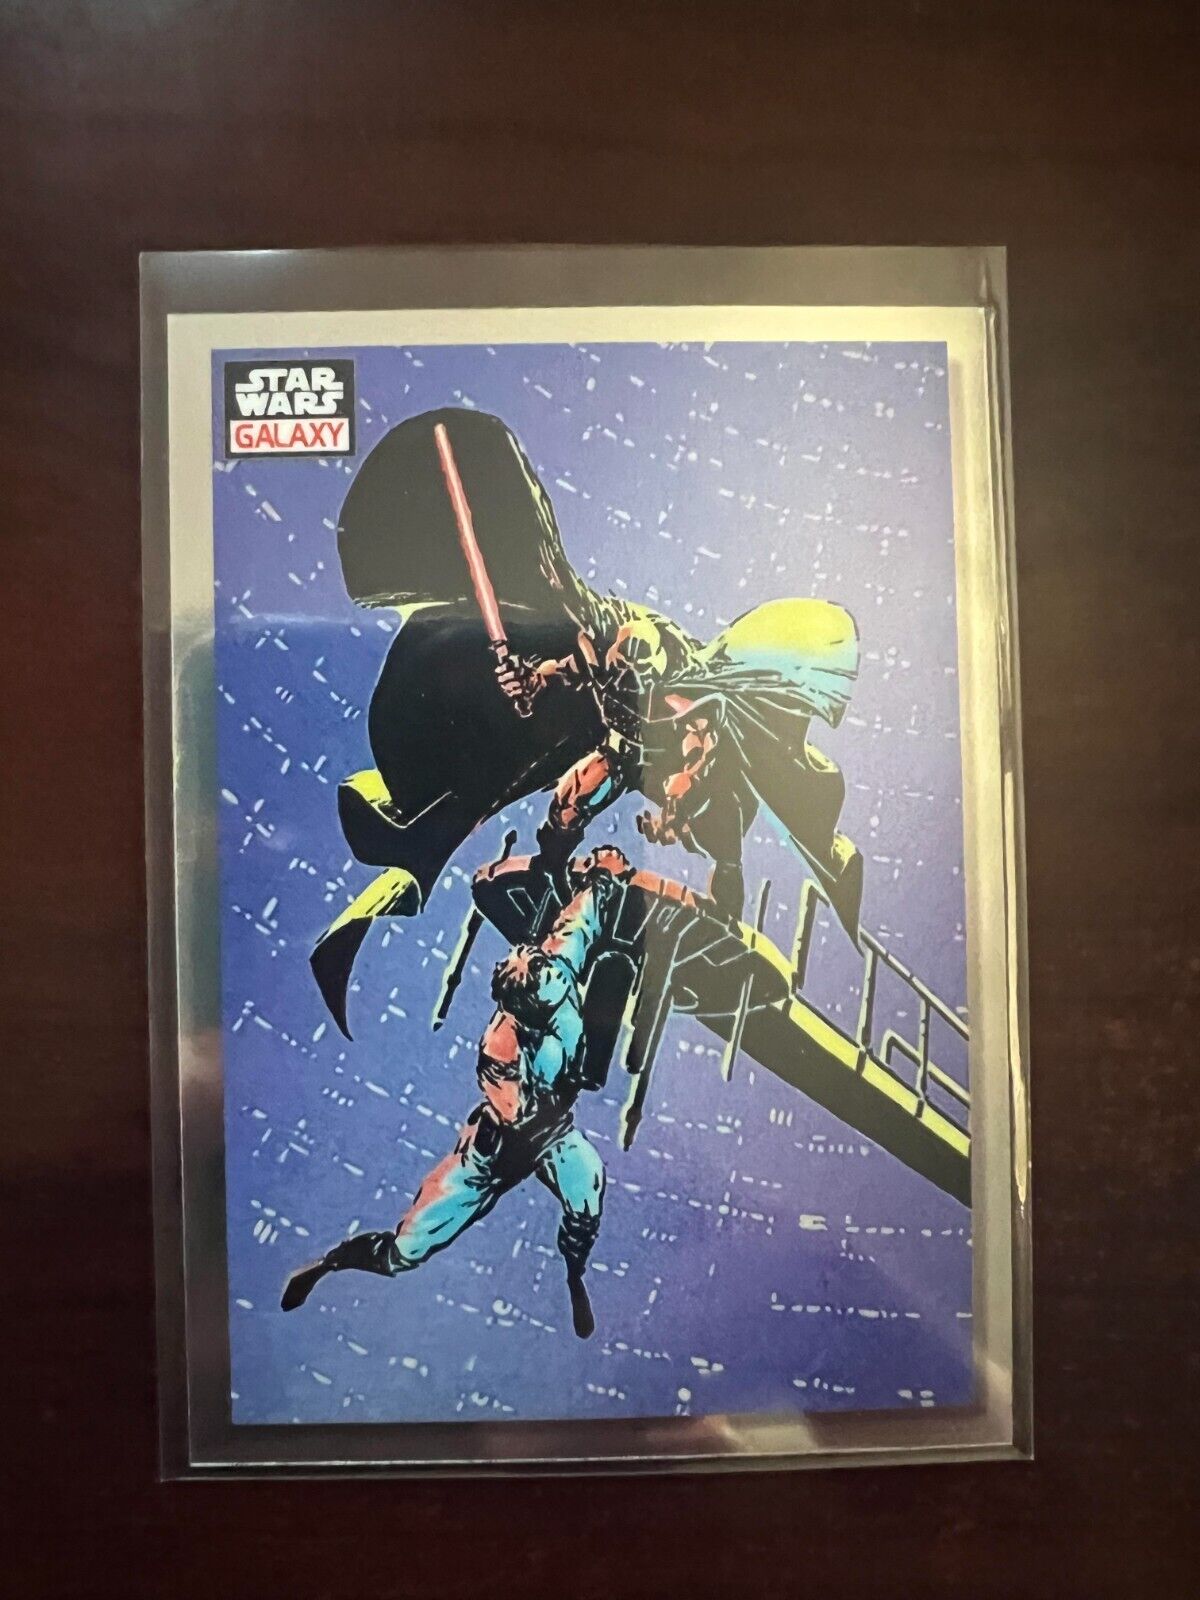 2023 Topps Star Wars Galaxy Chrome BASE #1-100  - ALL CARDS $0.99